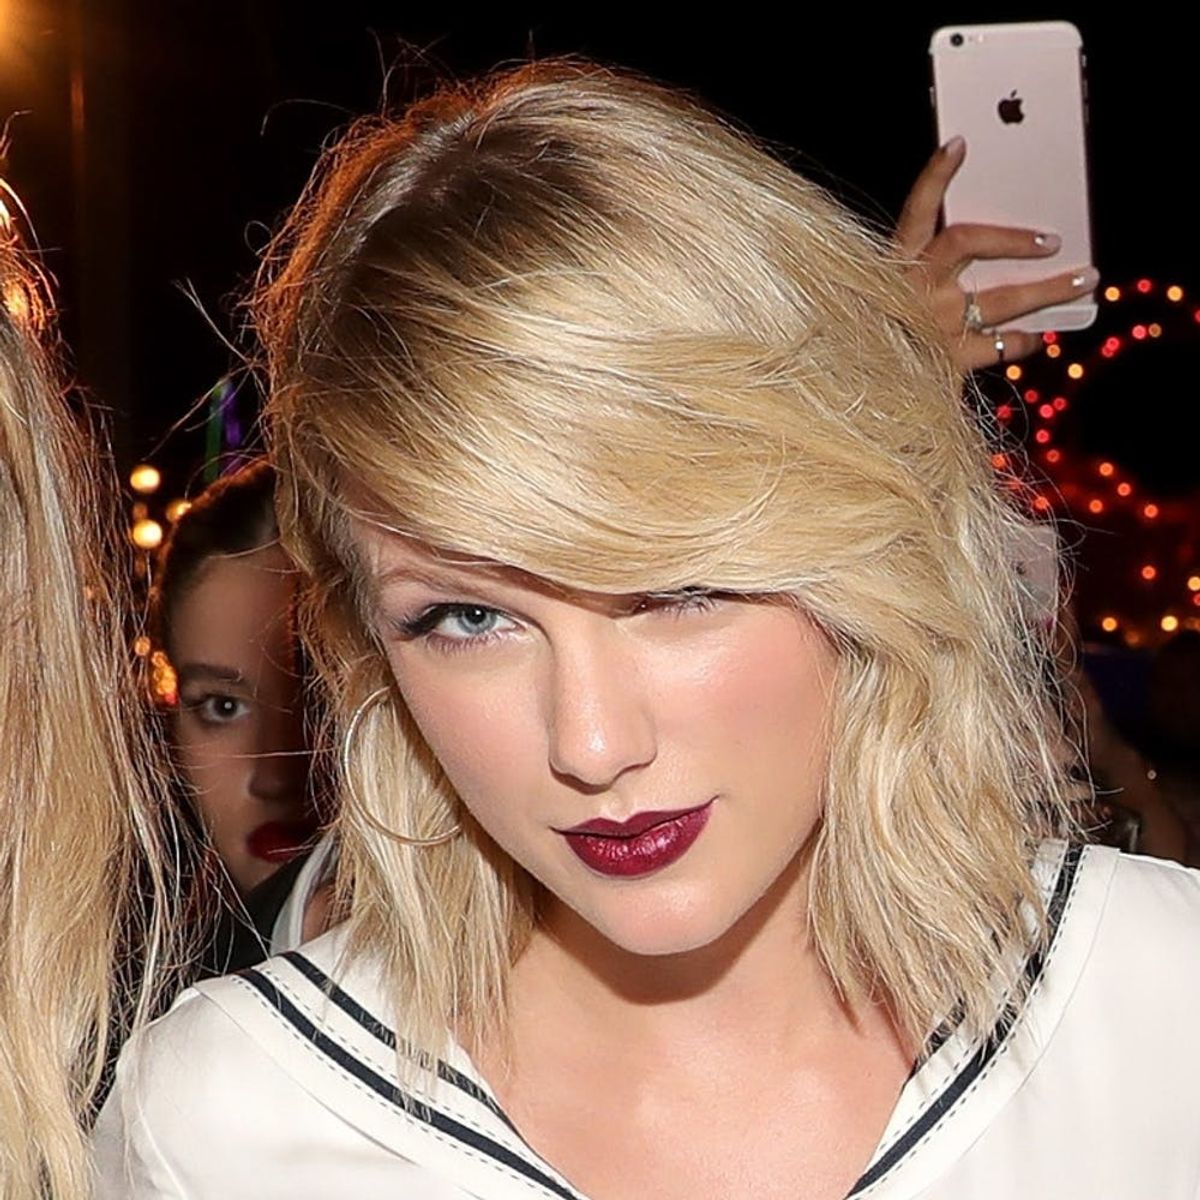 Taylor Swift Is ALREADY Teasing Another New Song